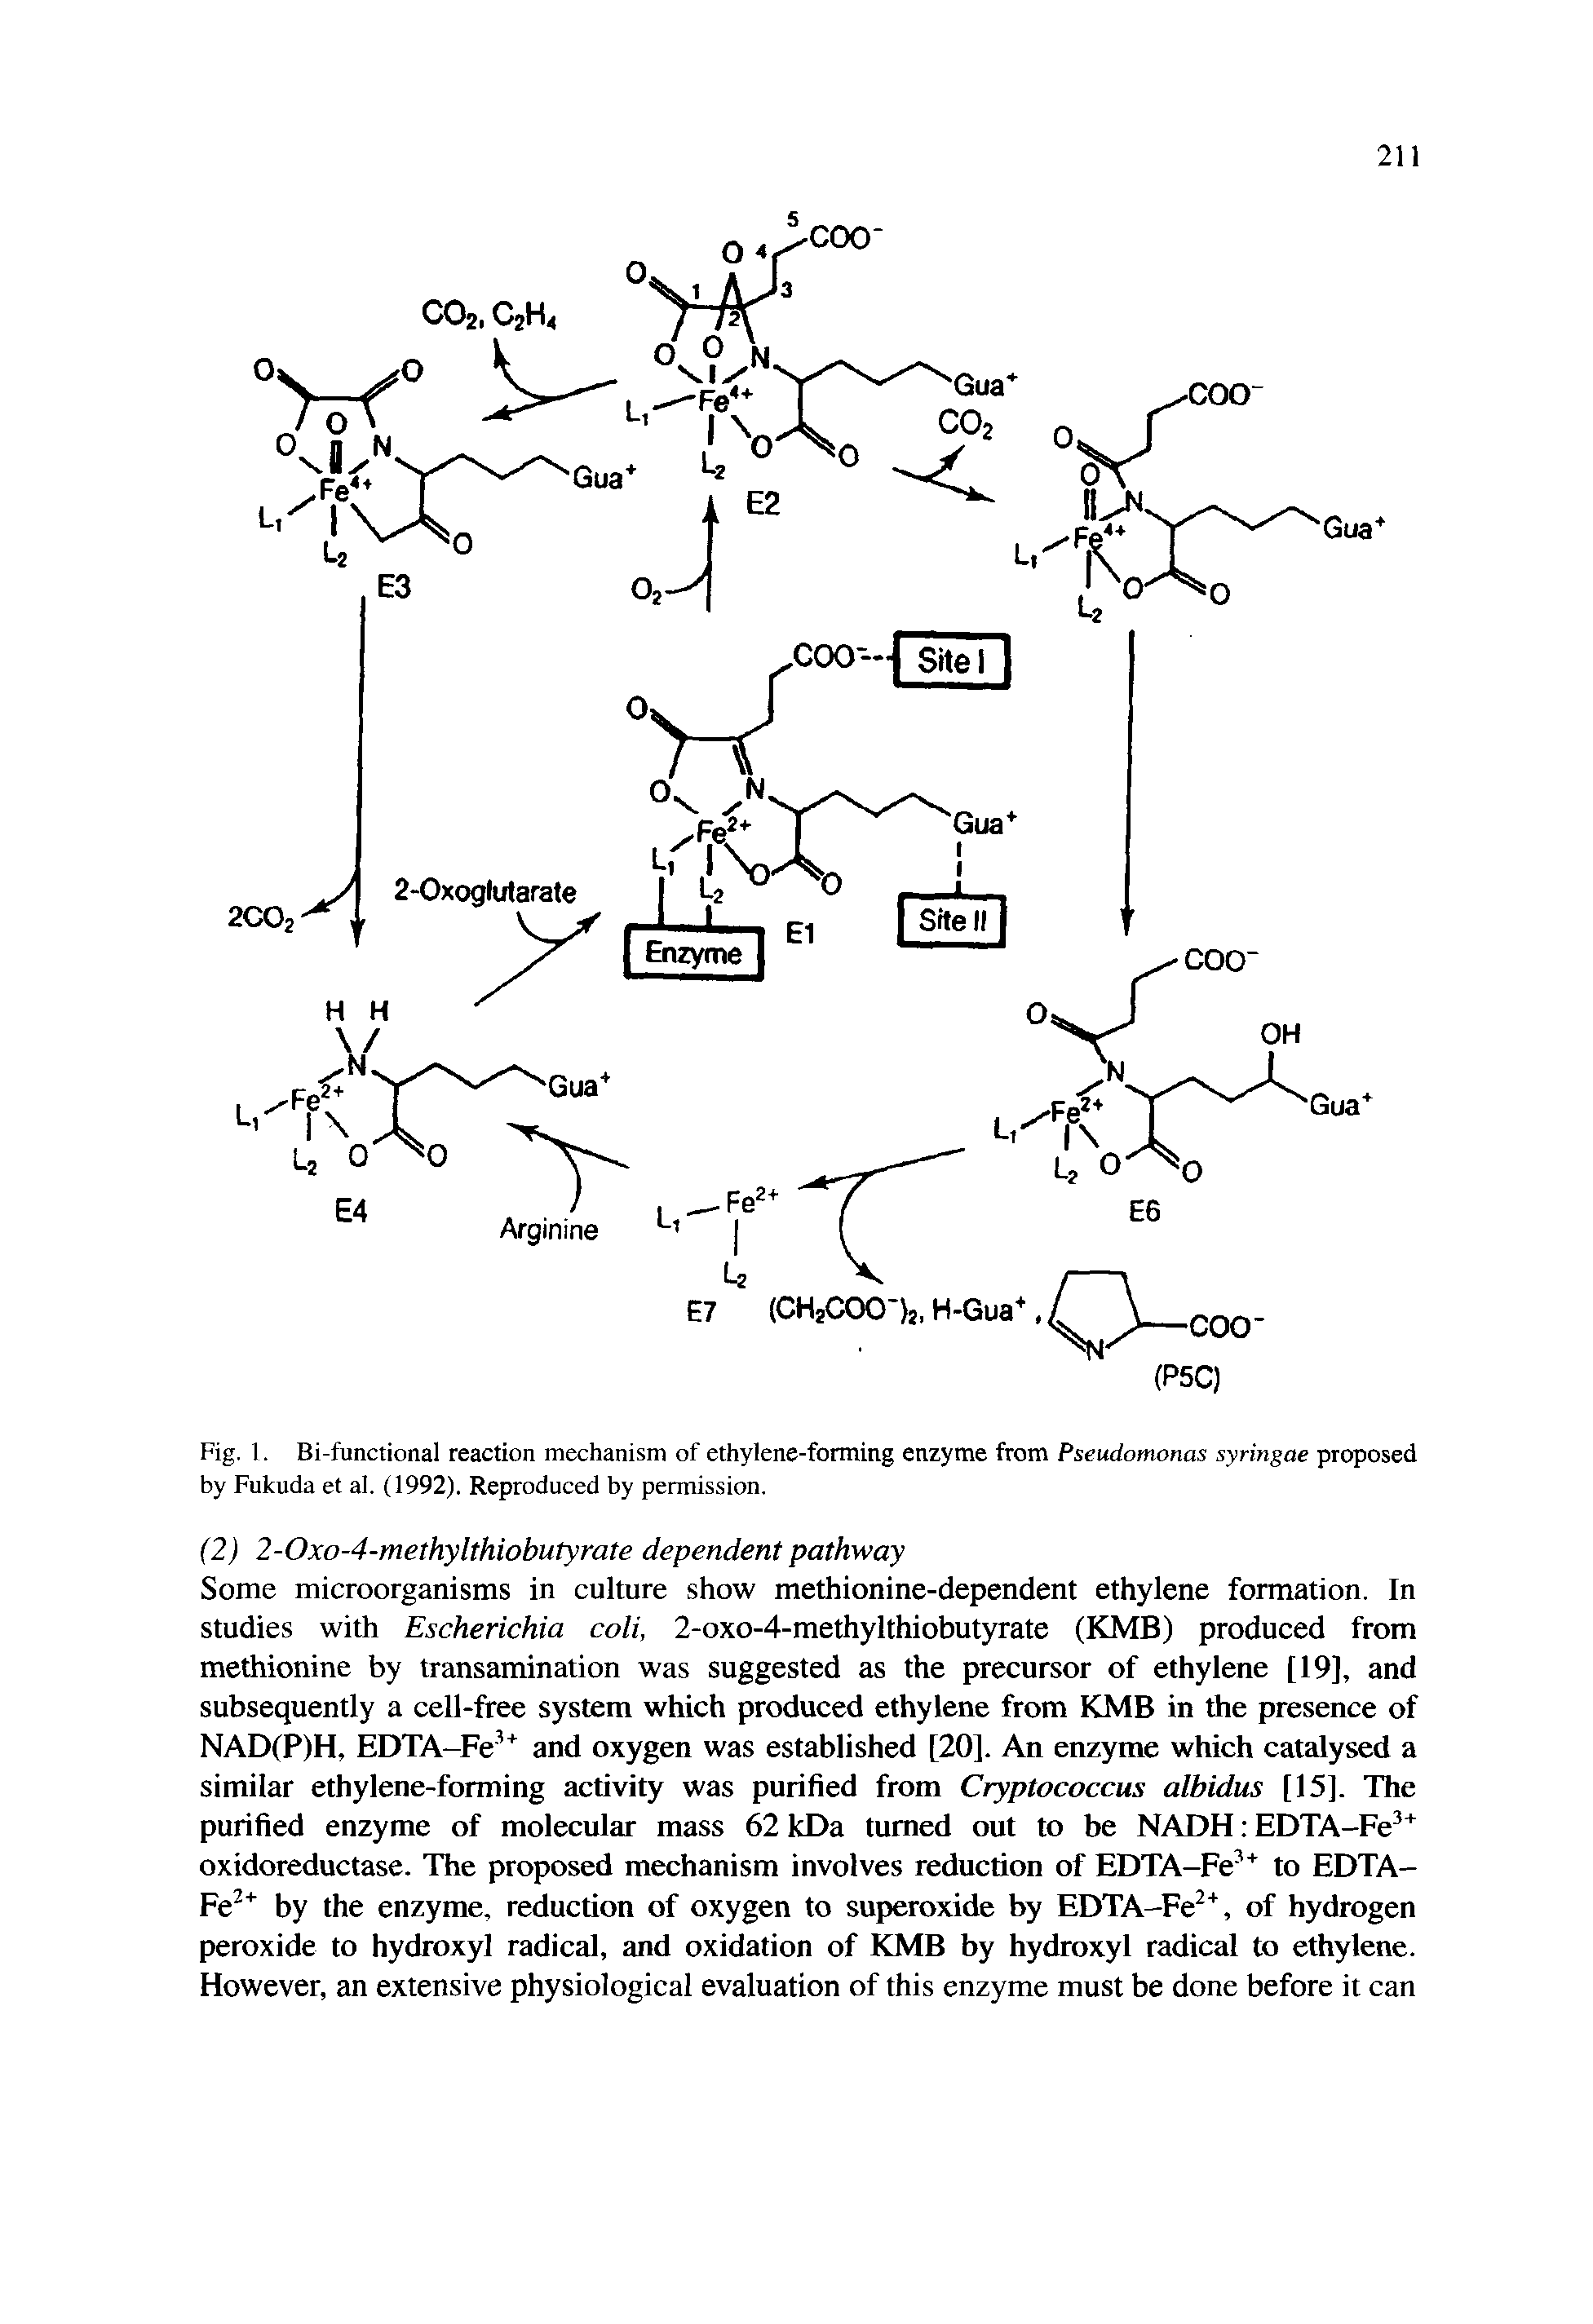 Fig. 1. Bi-functional reaction mechanism of ethylene-forming enzyme from Pseudomonas syringae proposed by Fukuda et al. (1992). Reproduced by permission.